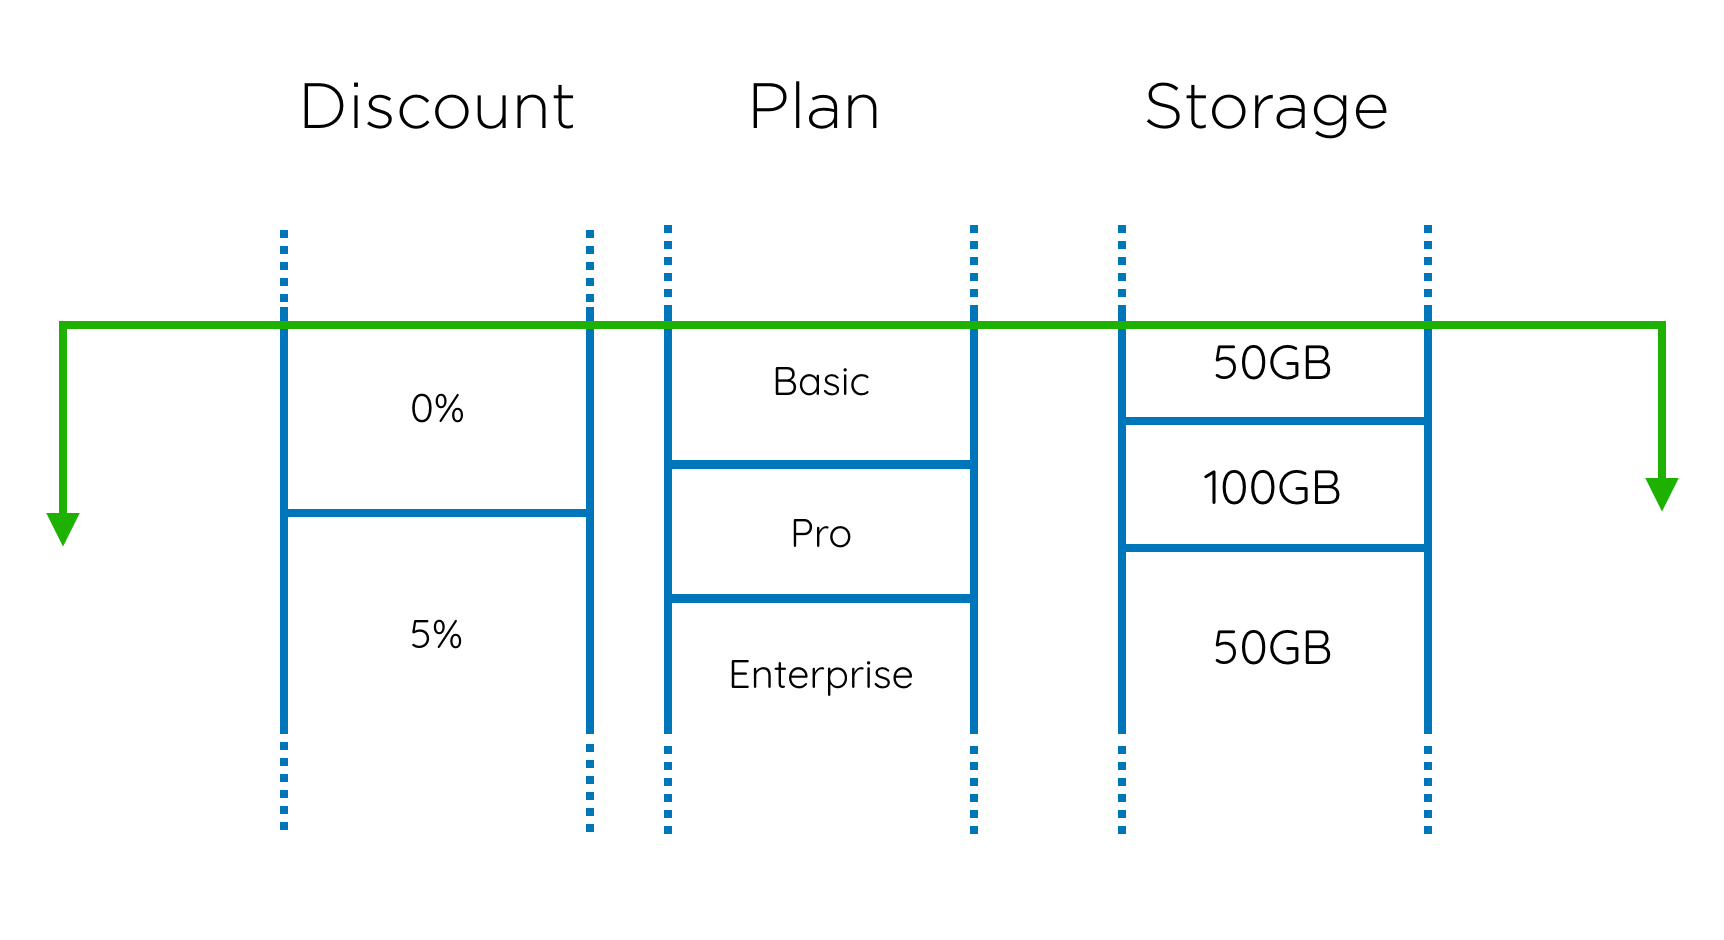 Overlapping plans, storage volumes and discounts